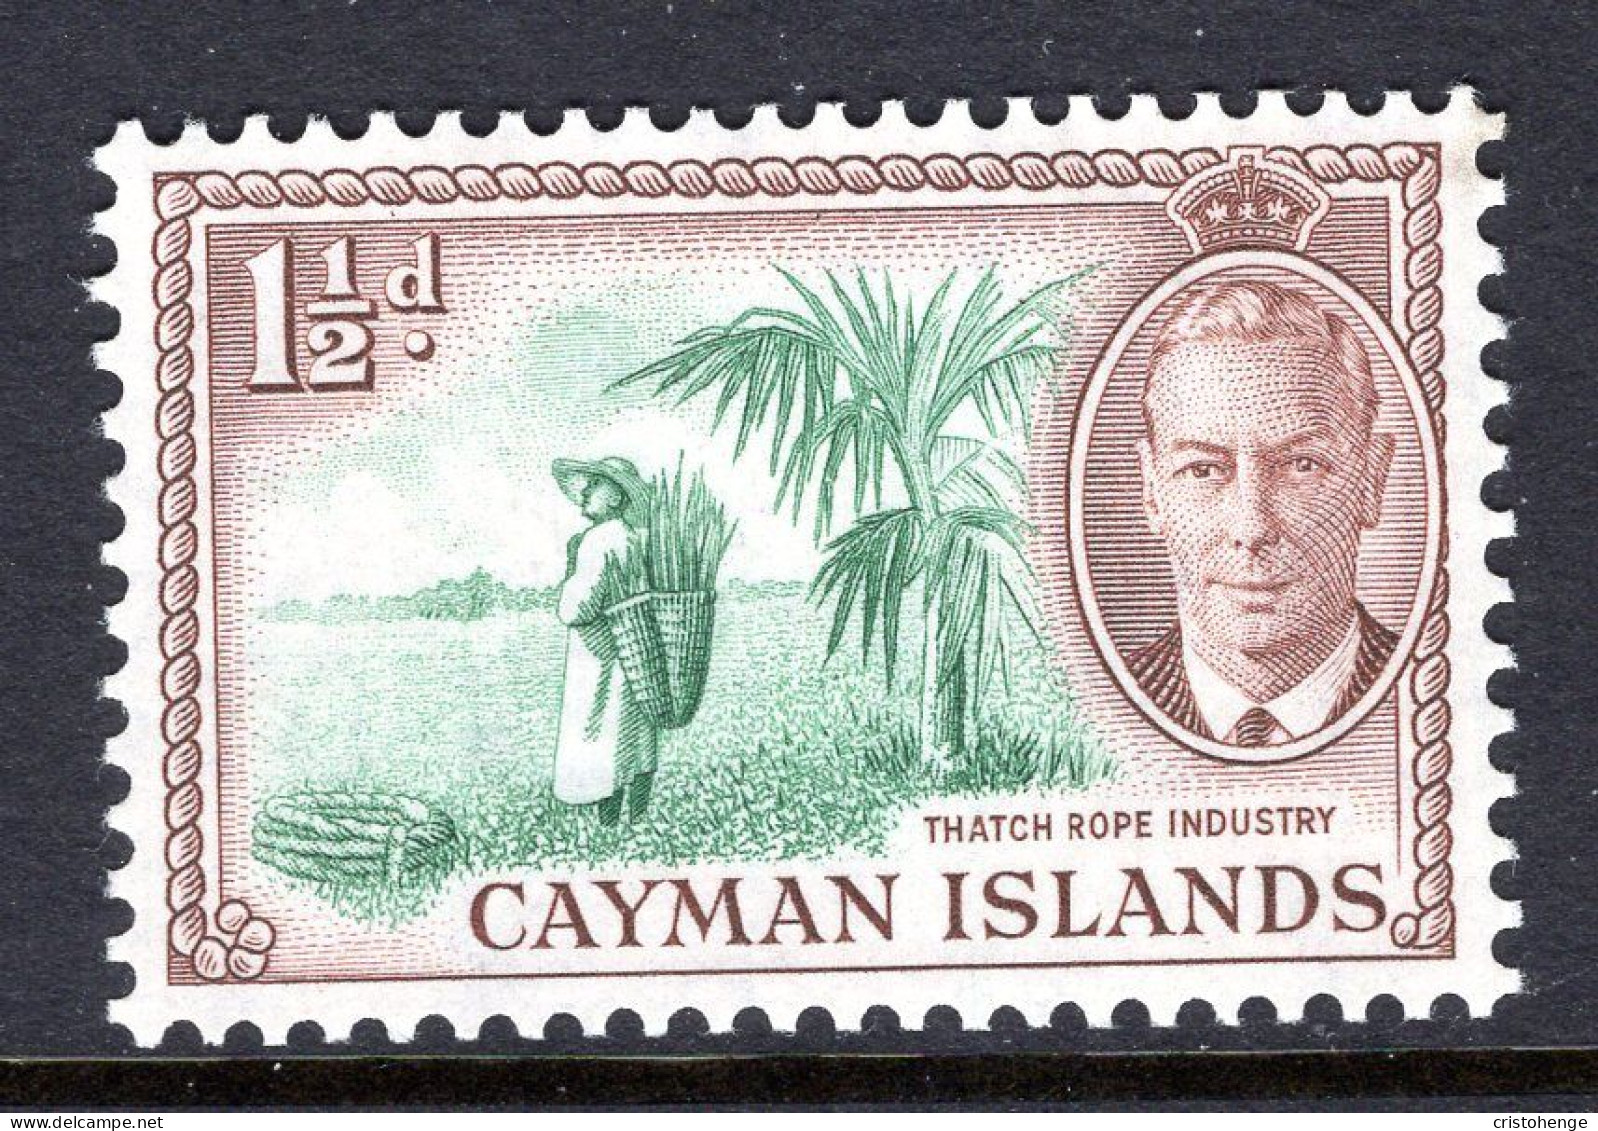 Cayman Islands 1950 KGVI Pictorials - 1½d Thatch Rope Industry MNH (SG 138) - Cayman Islands